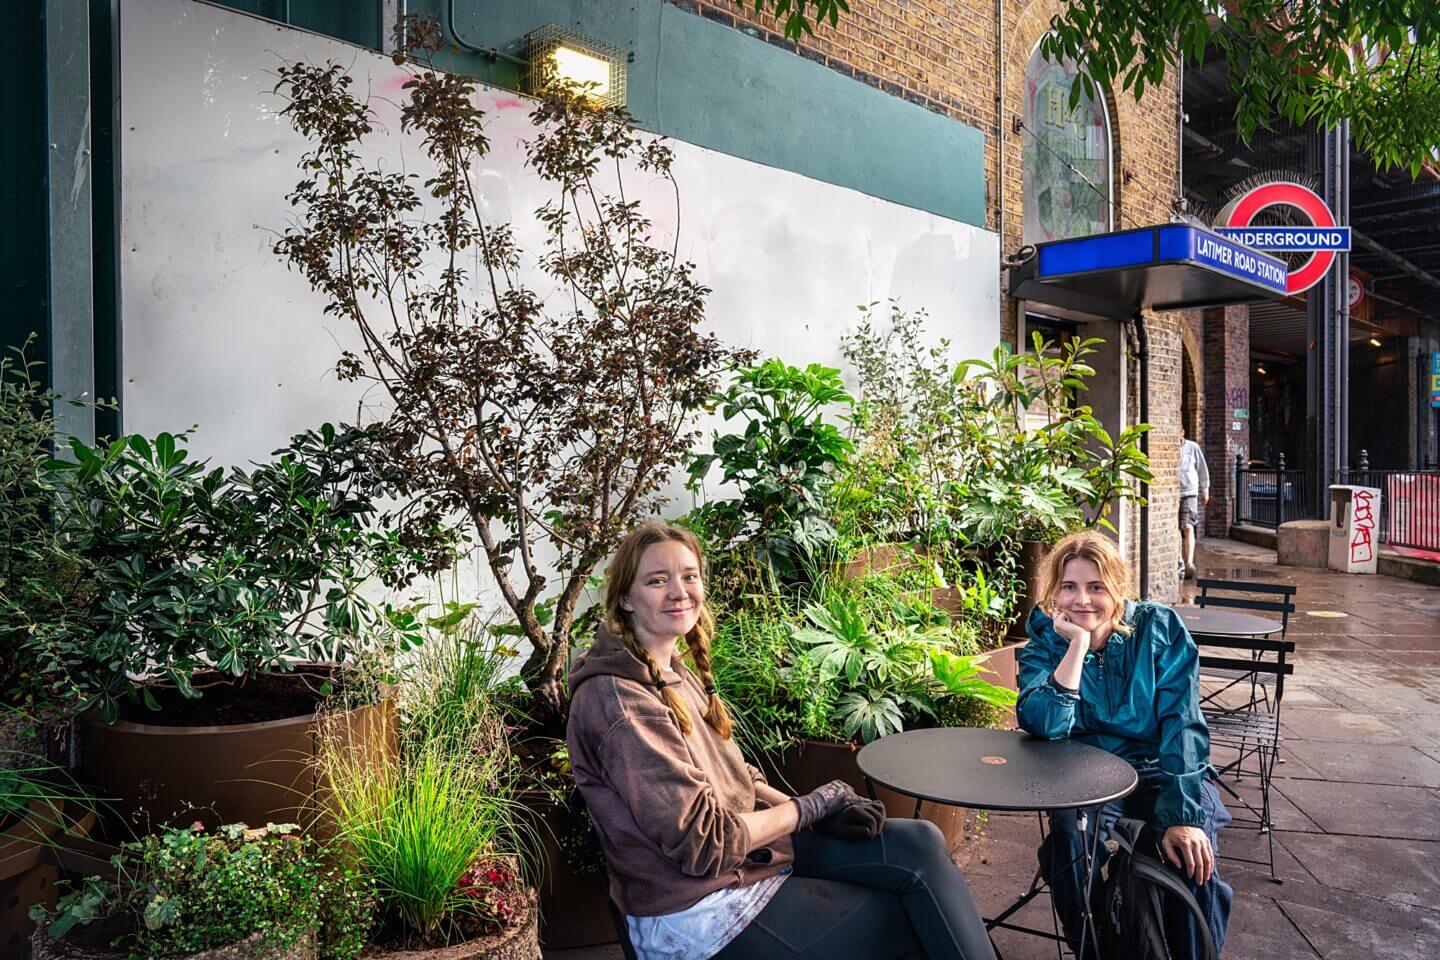 Emilie Bausager and Amelia Bouquet garden designers outside their container garden at Latimer Road tube station